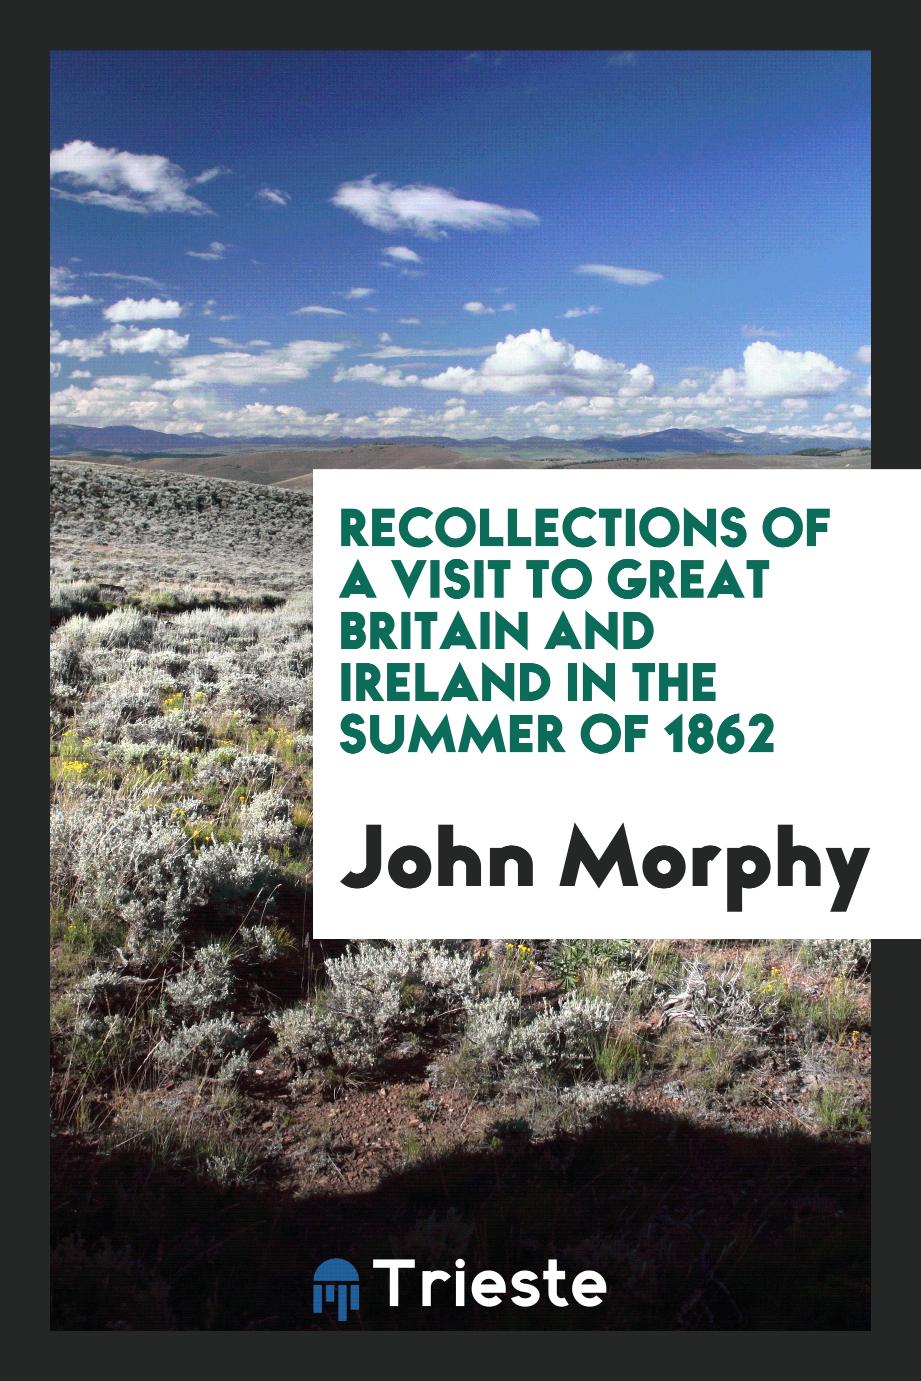 Recollections of a visit to Great Britain and Ireland in the summer of 1862